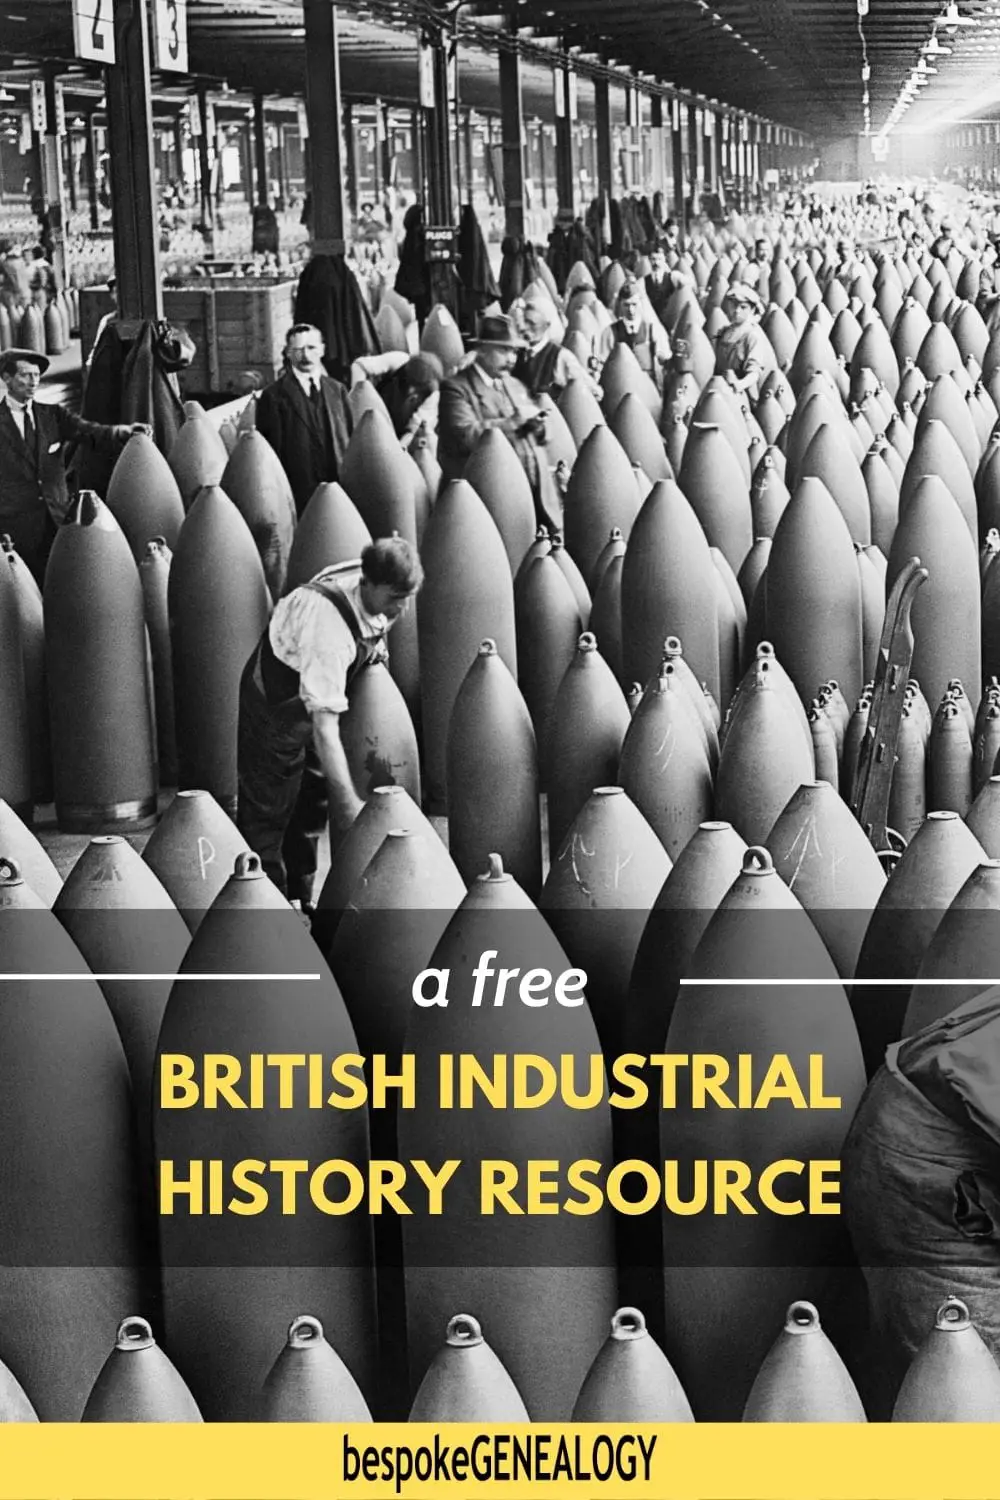 A free British industrial history resource. Photo from the First World War of munition workers painting shells in a British factory.